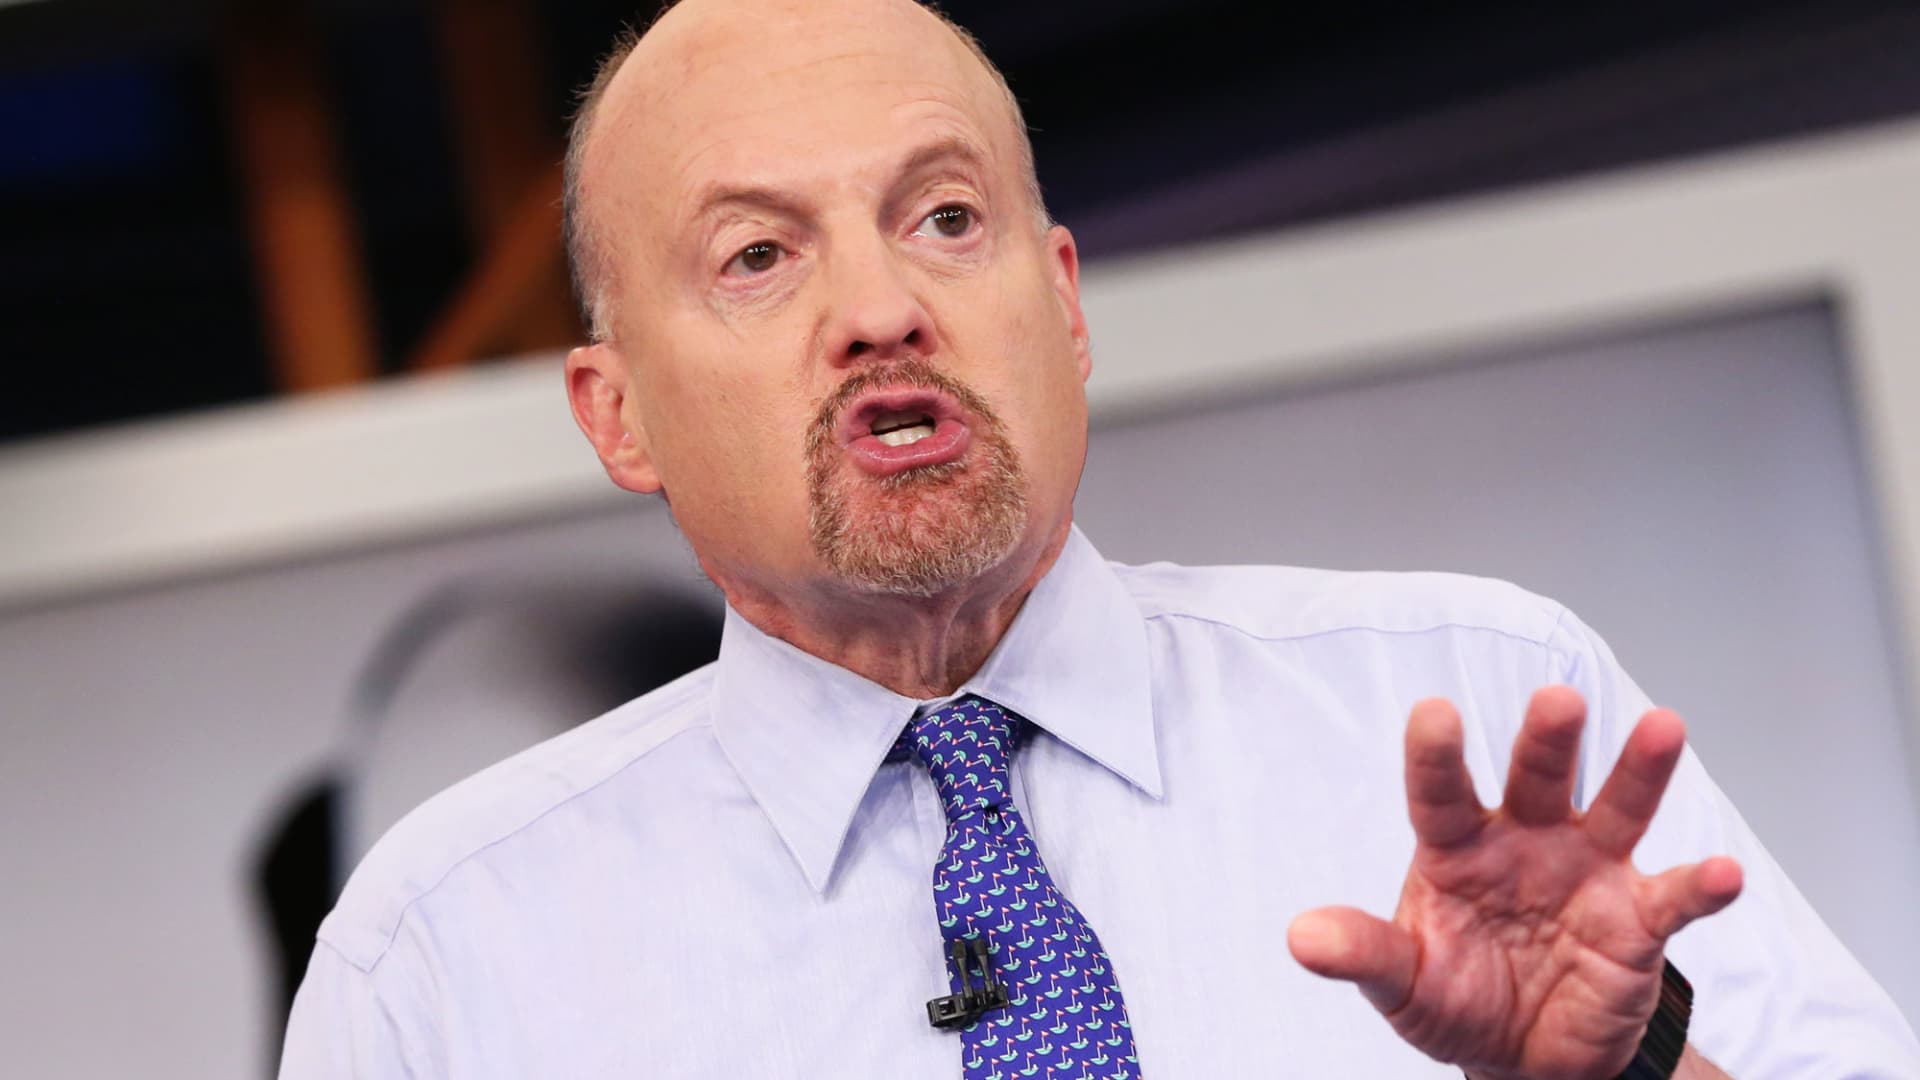 Jim Cramer says investors shouldn't allow a tumultuous market to prevent them from finding 'better opportunities'